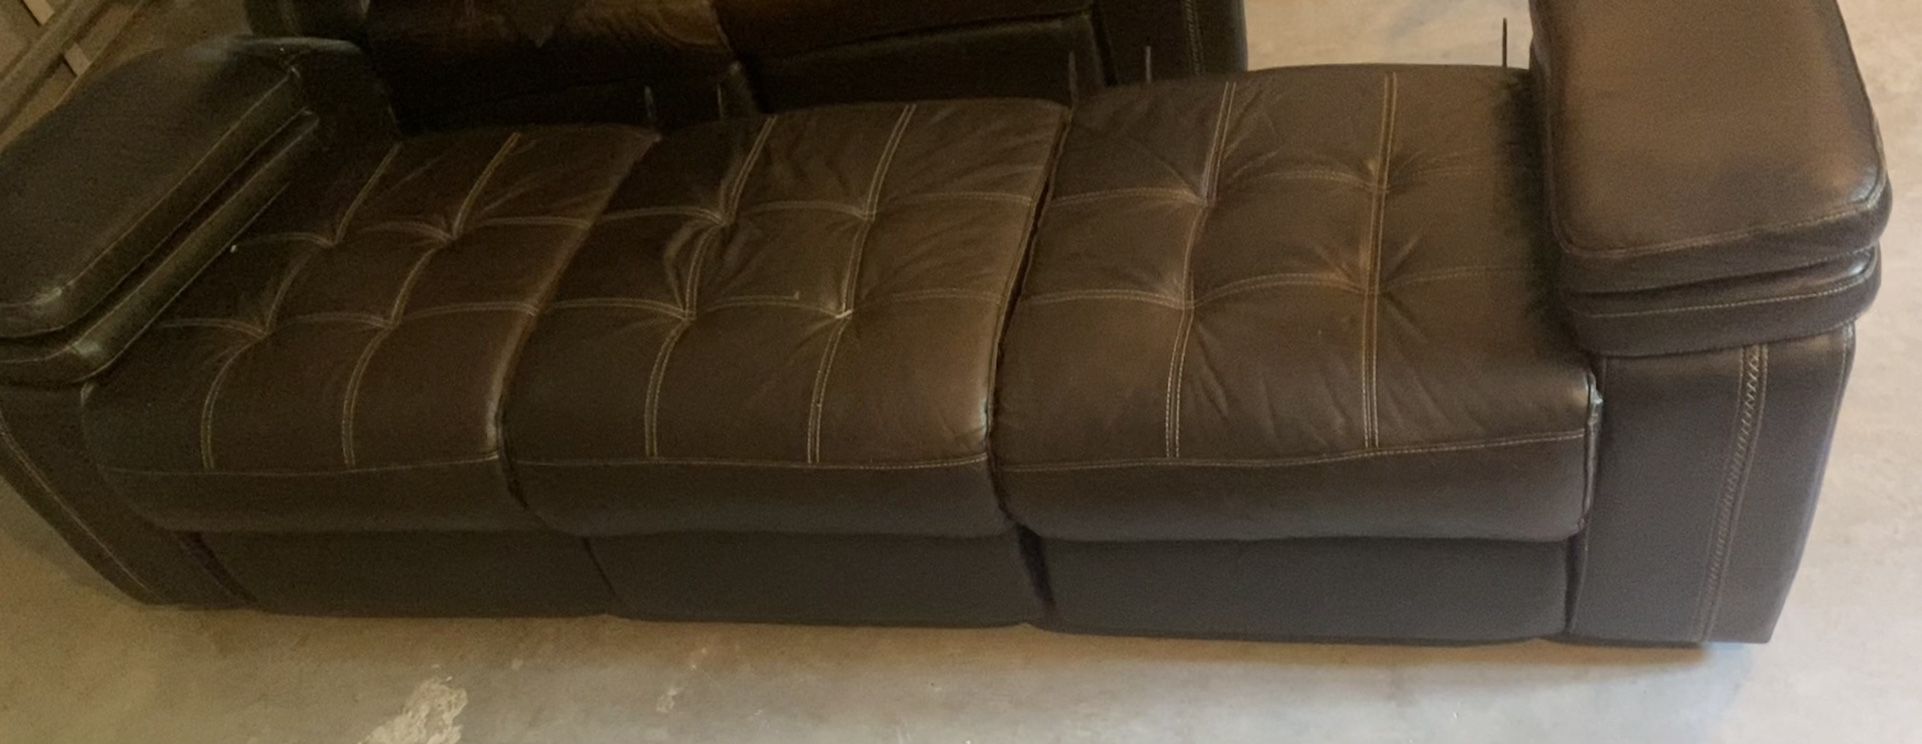 Couch For Free With Manual Recliner 